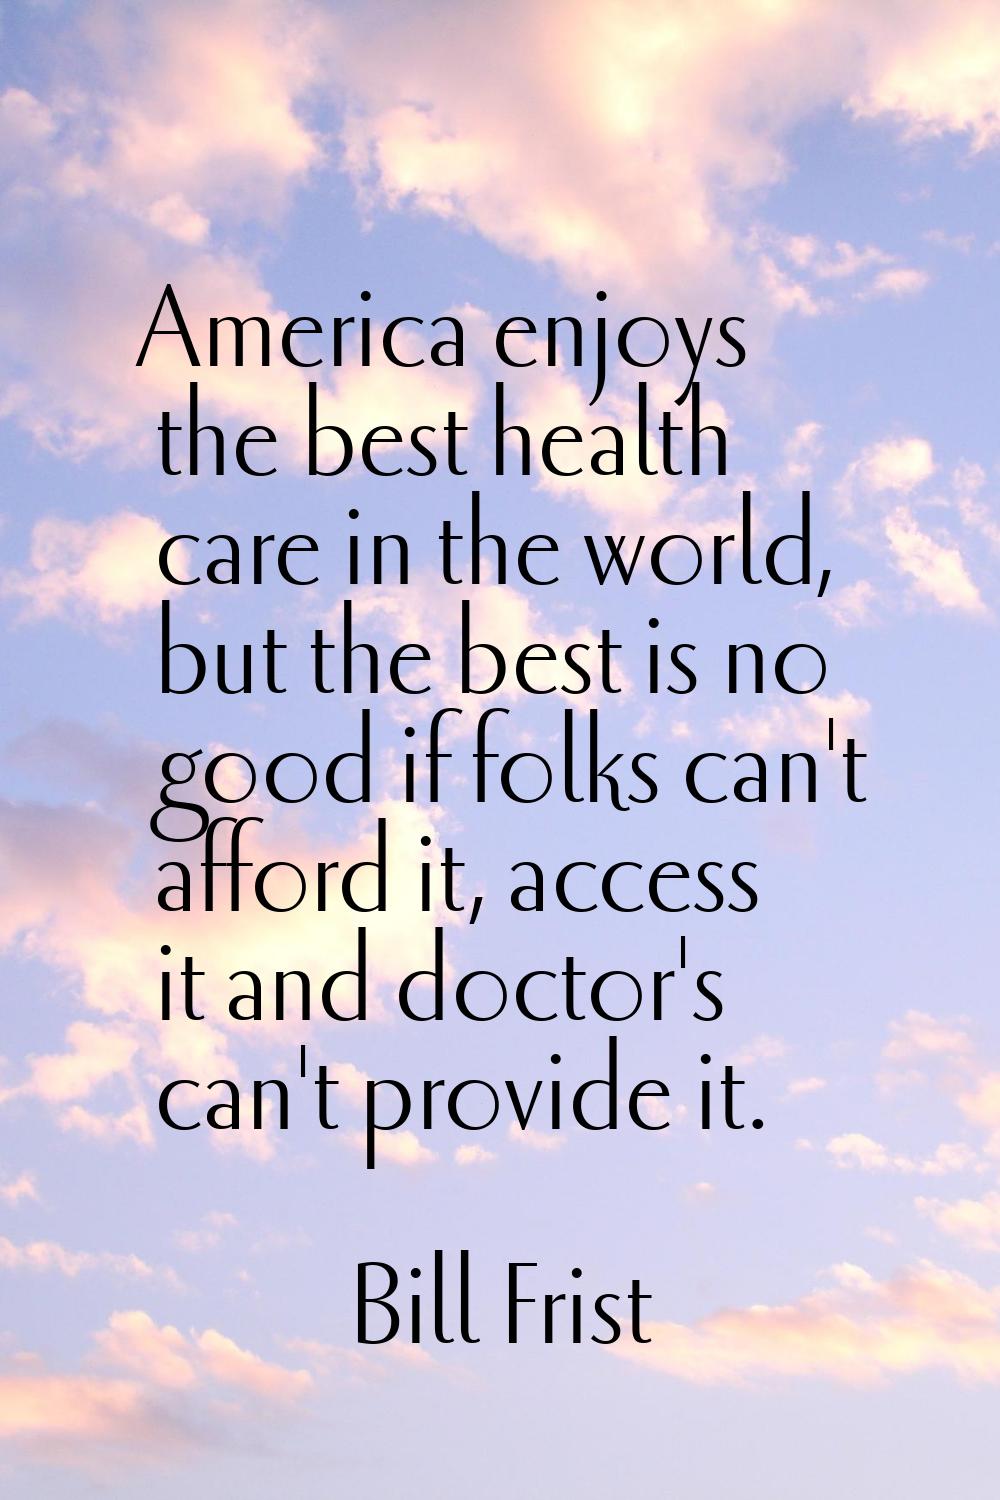 America enjoys the best health care in the world, but the best is no good if folks can't afford it,